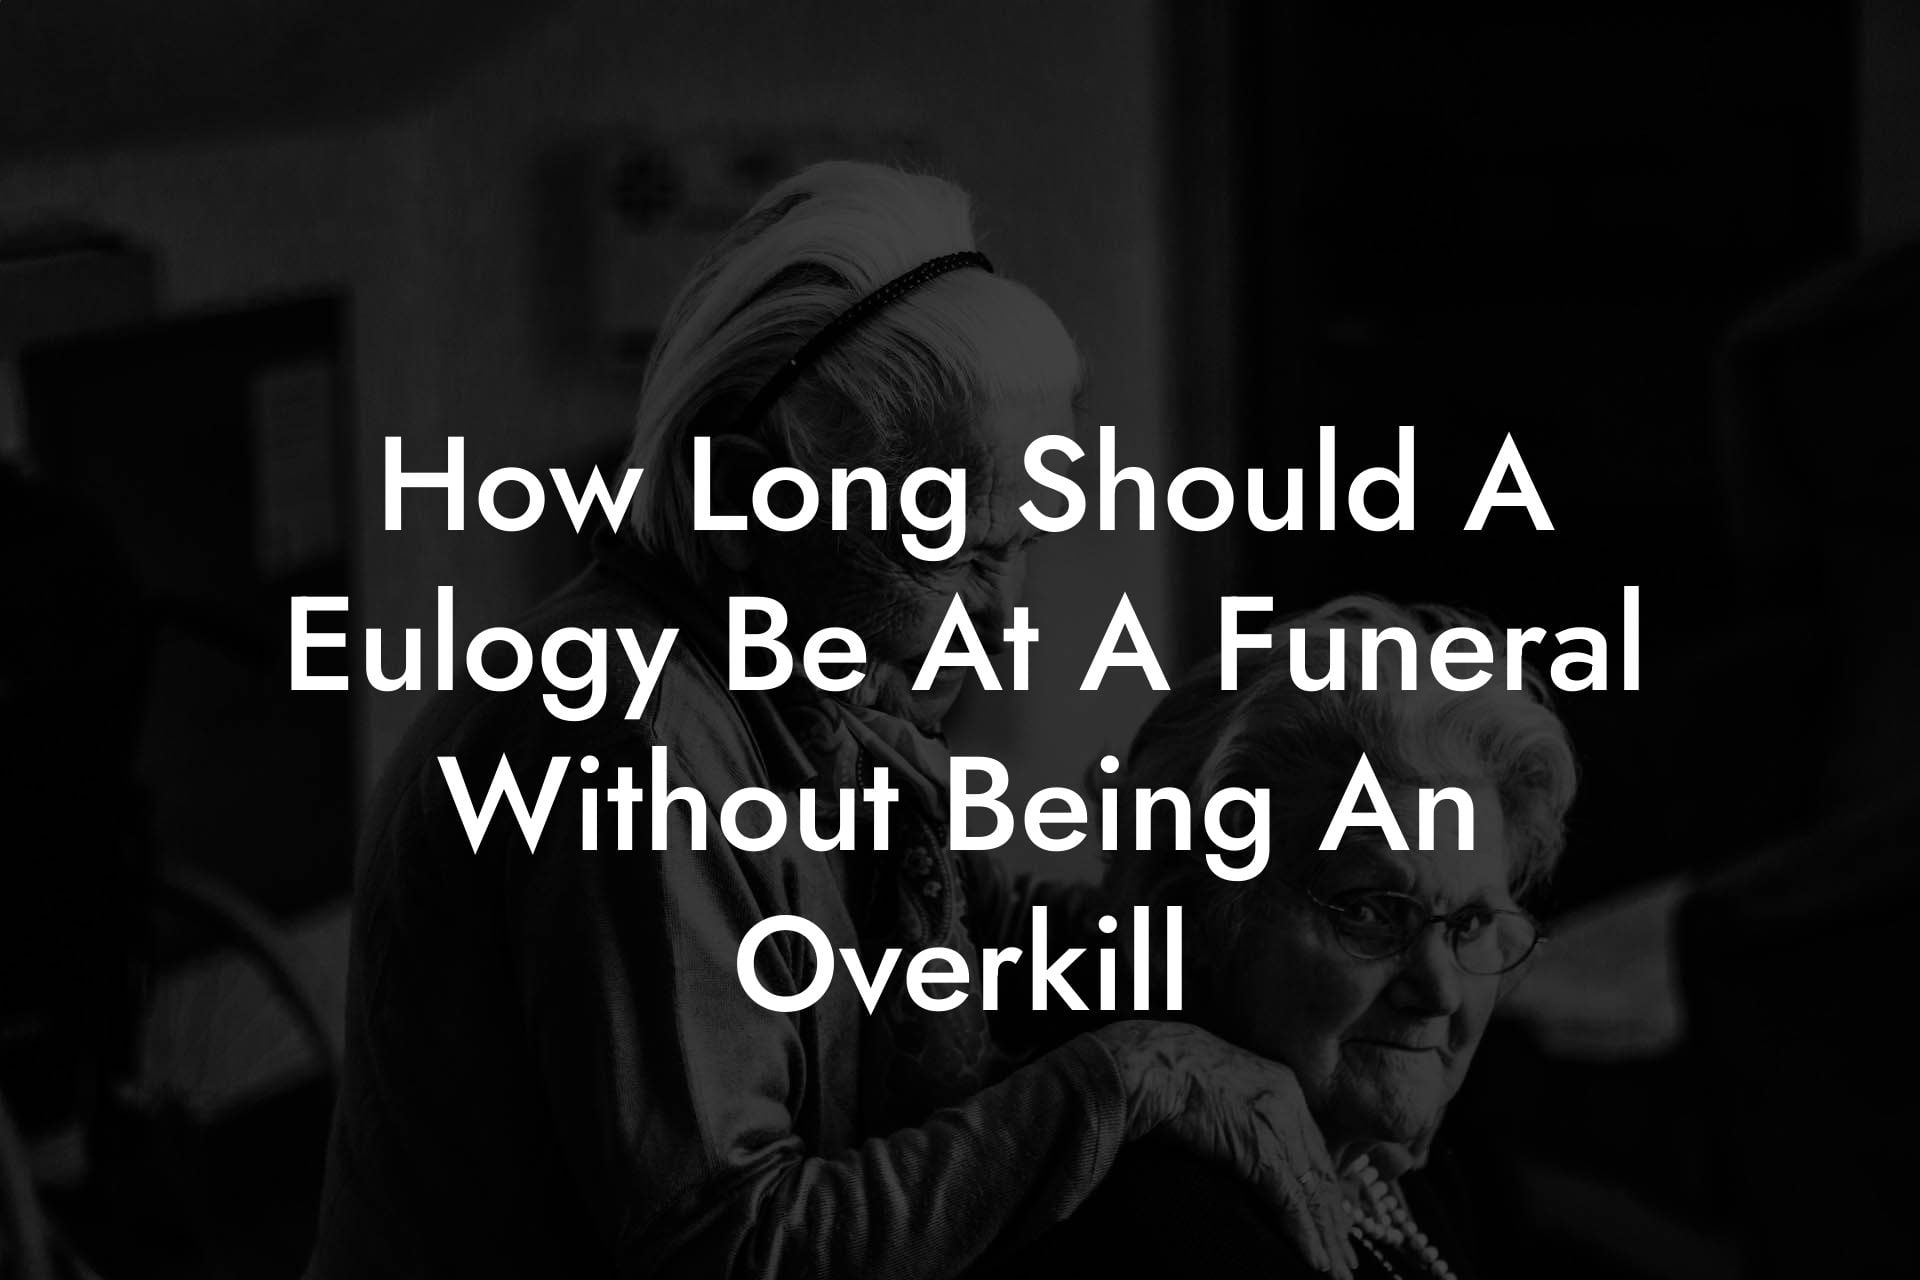 How Long Should A Eulogy Be At A Funeral Without Being An Overkill